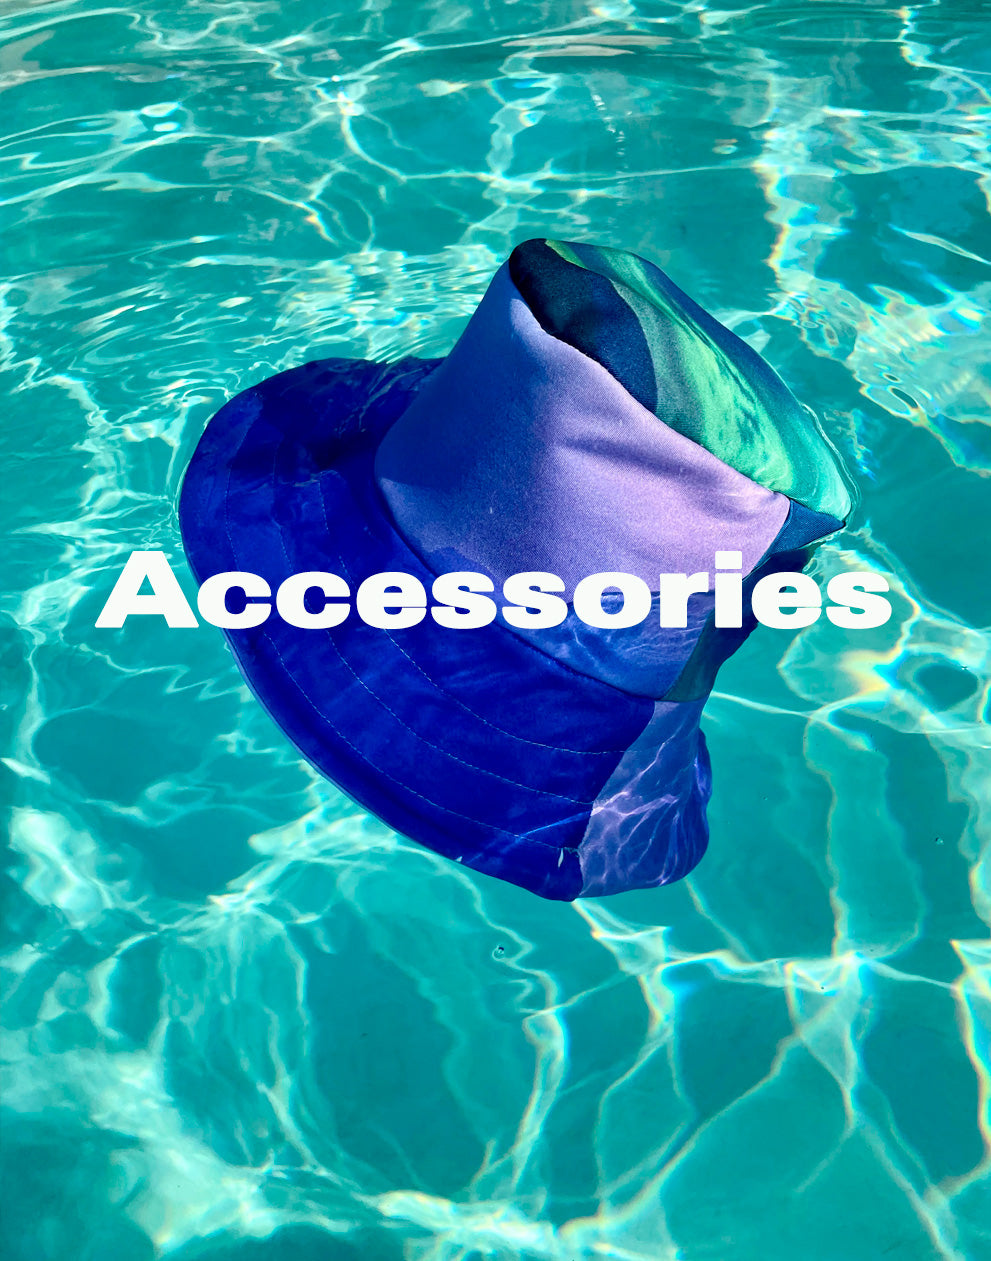 Together Accessories